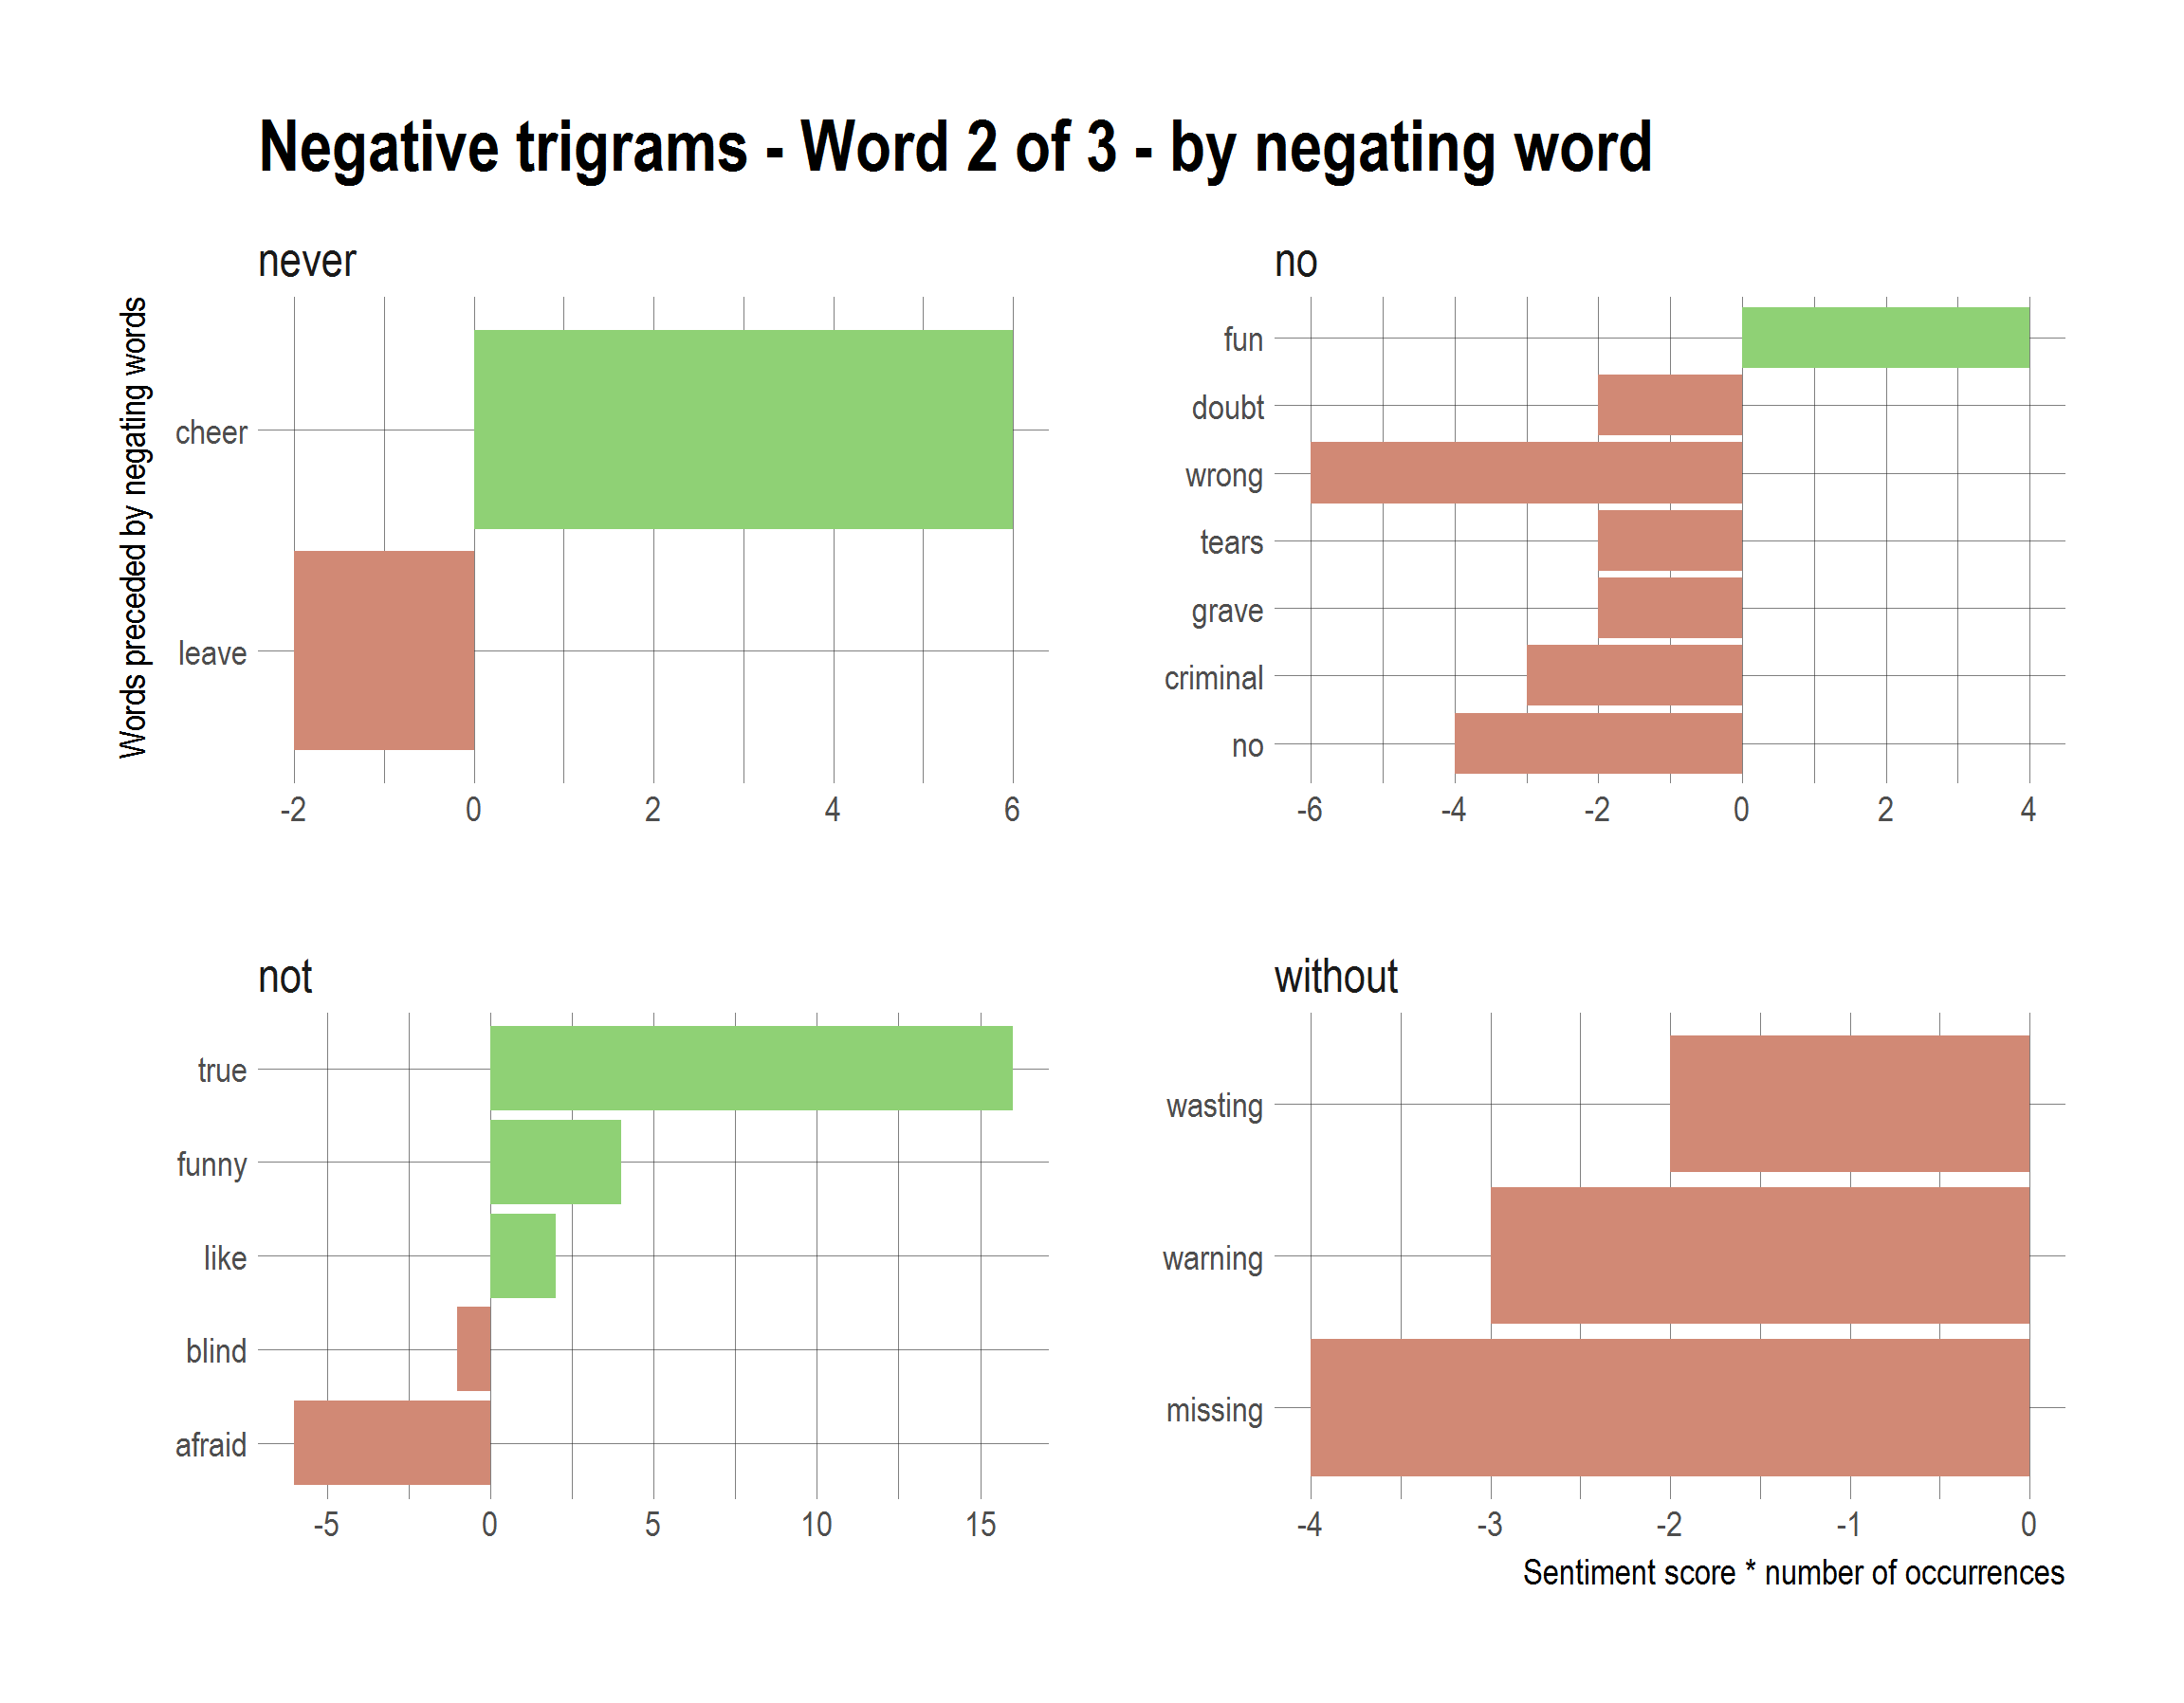 2017-10-22-Negative-trigrams-Word-2-of-3-by-negating-word.png